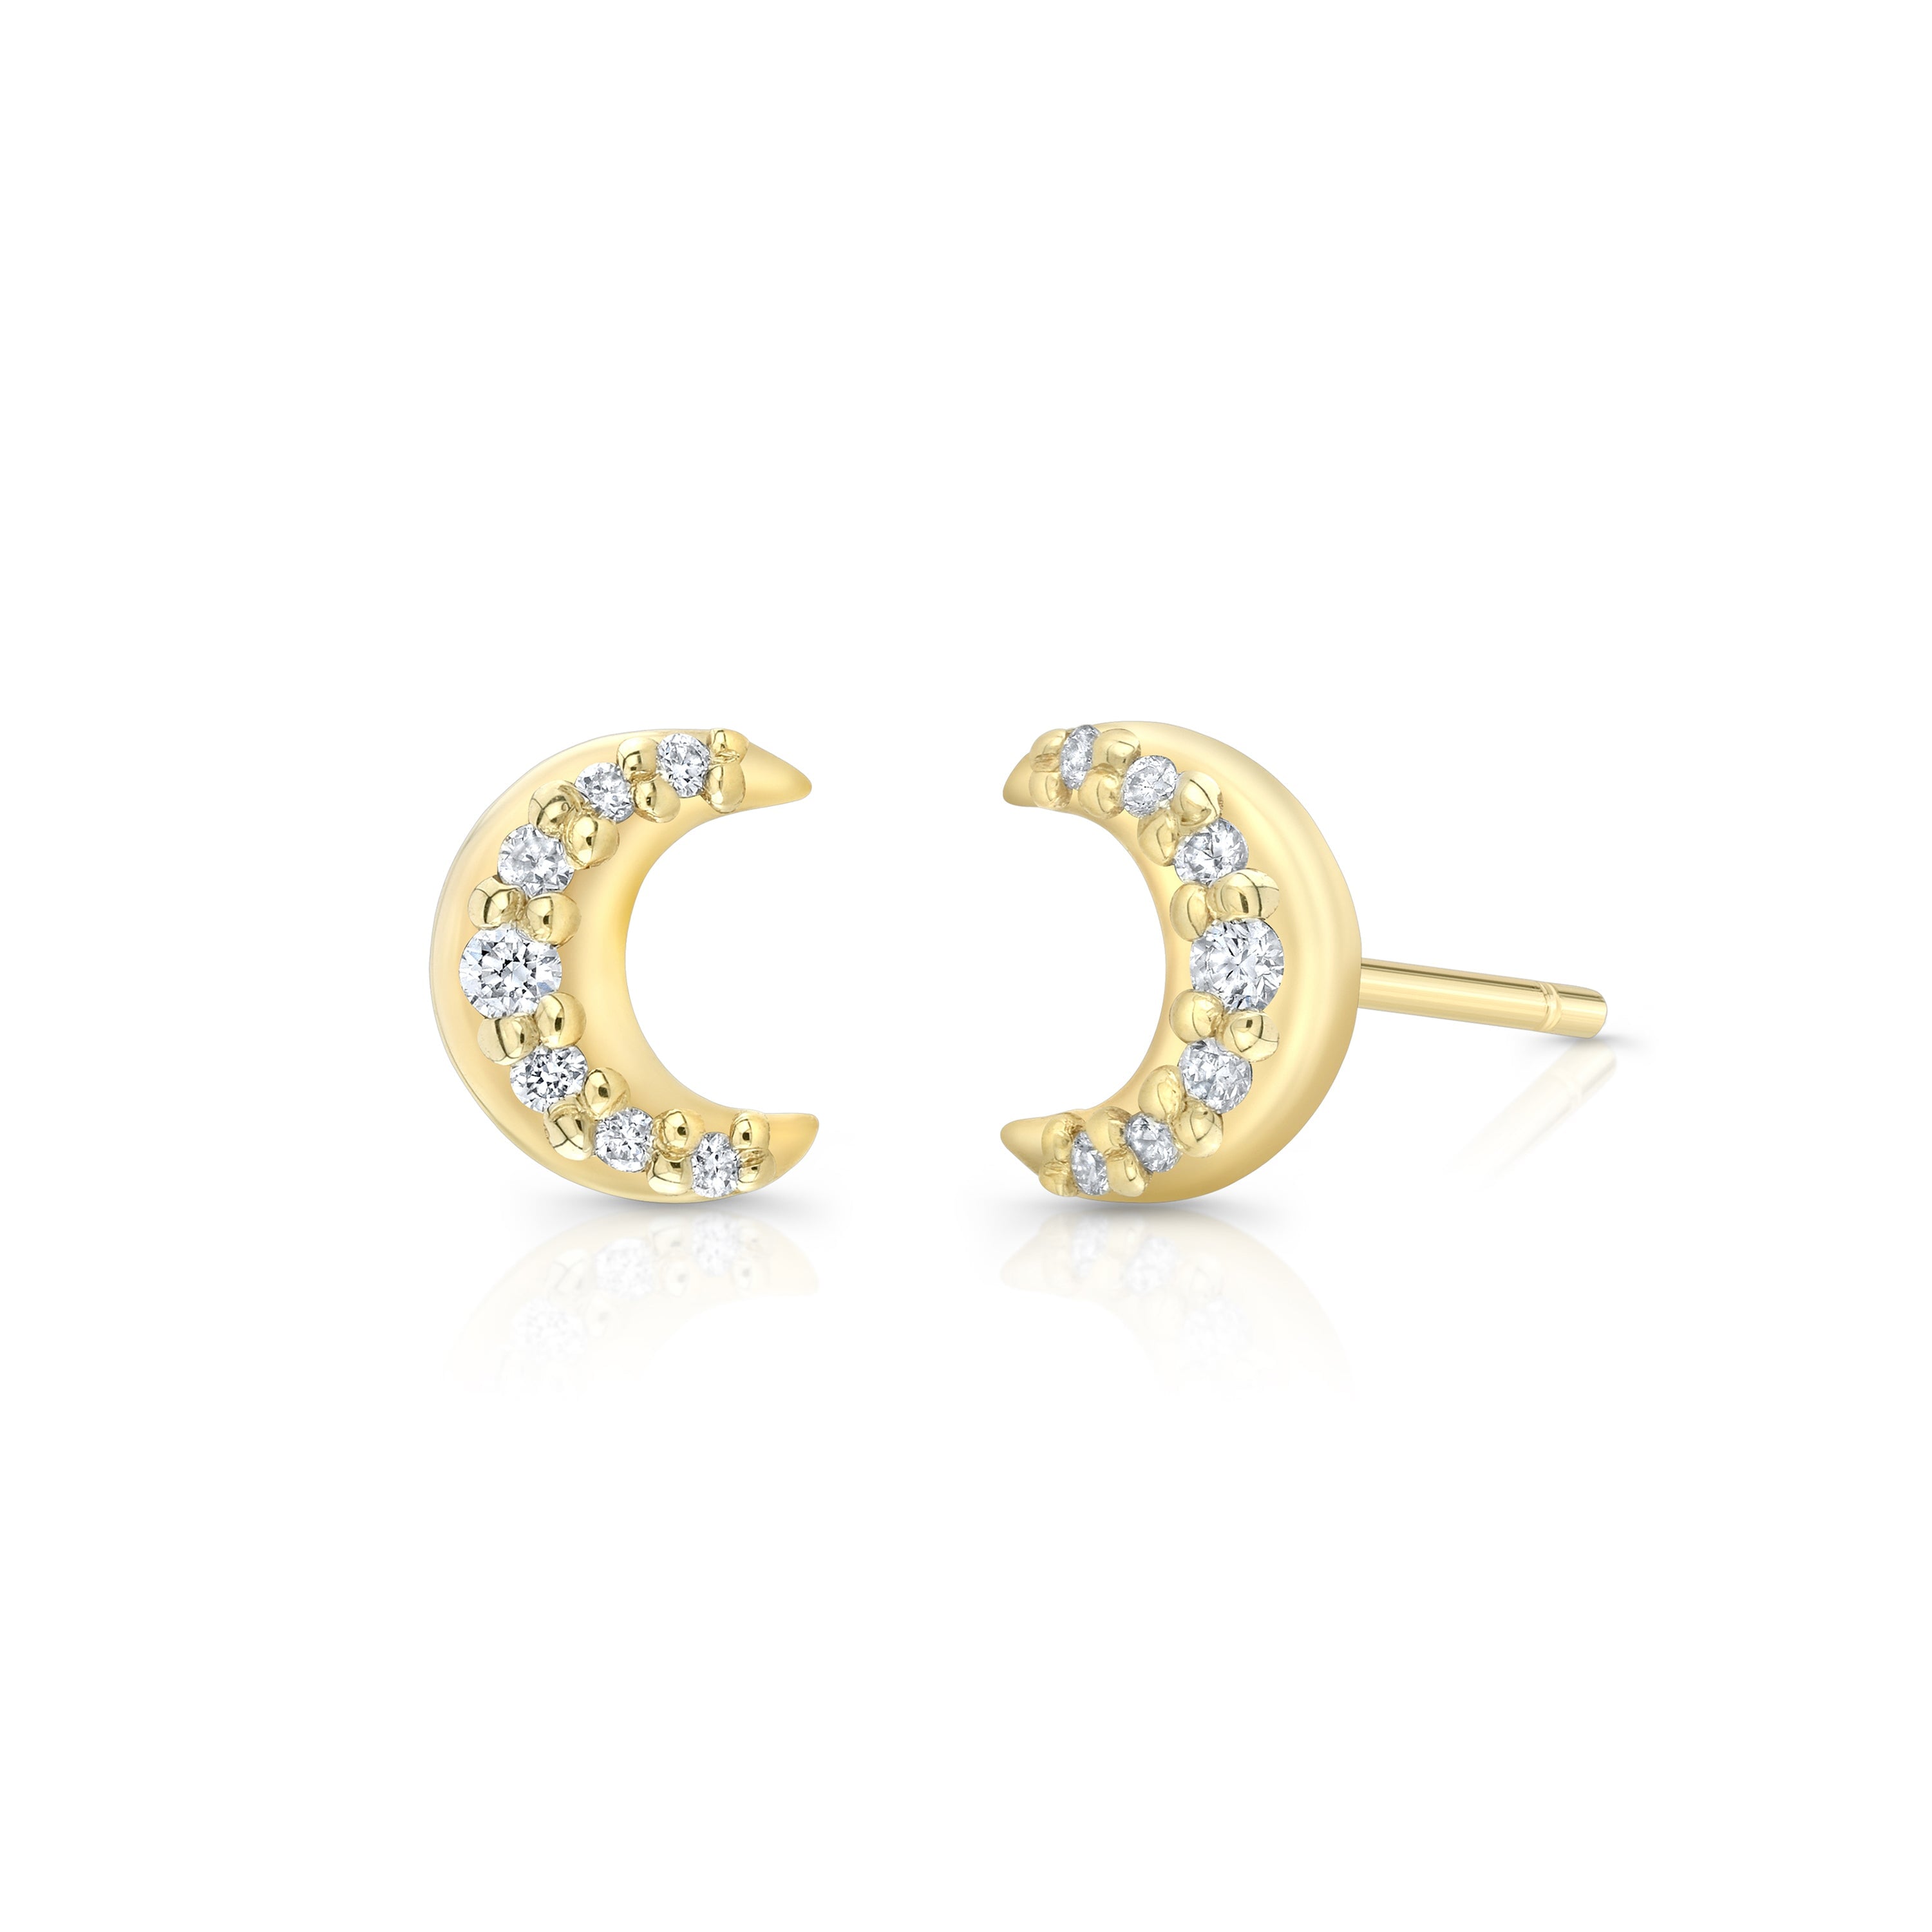 Crescent Moon Studs Earrings Carter Eve Jewelry 